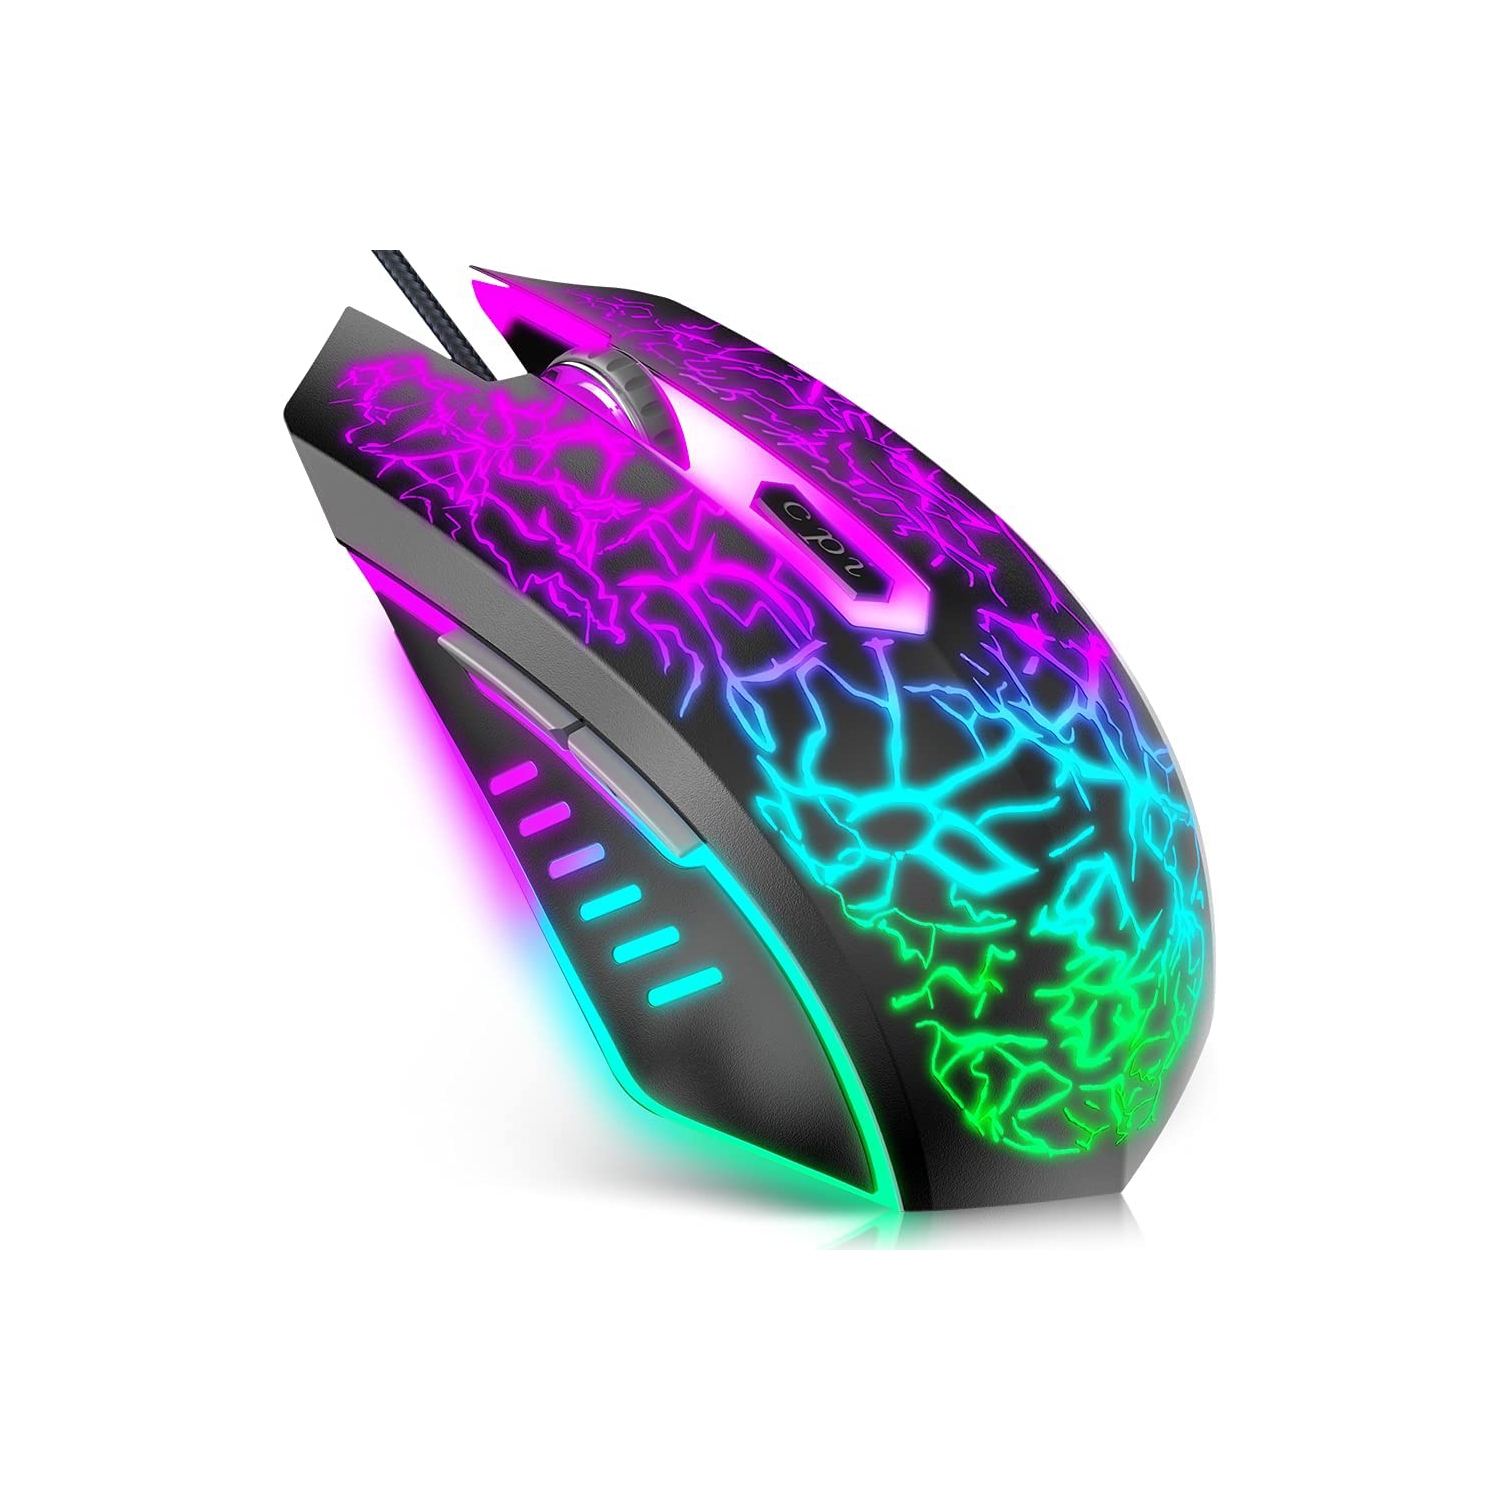 VersionTECH. Gaming Mouse, Souris Ergonomic Wired Gaming Mice with 7 Colors LED Backlight, 4 DPI Settings Up to 3600 DPI Computer Mouse for Laptop PC Games & Work Compatible for Chromebook Windows 7/8